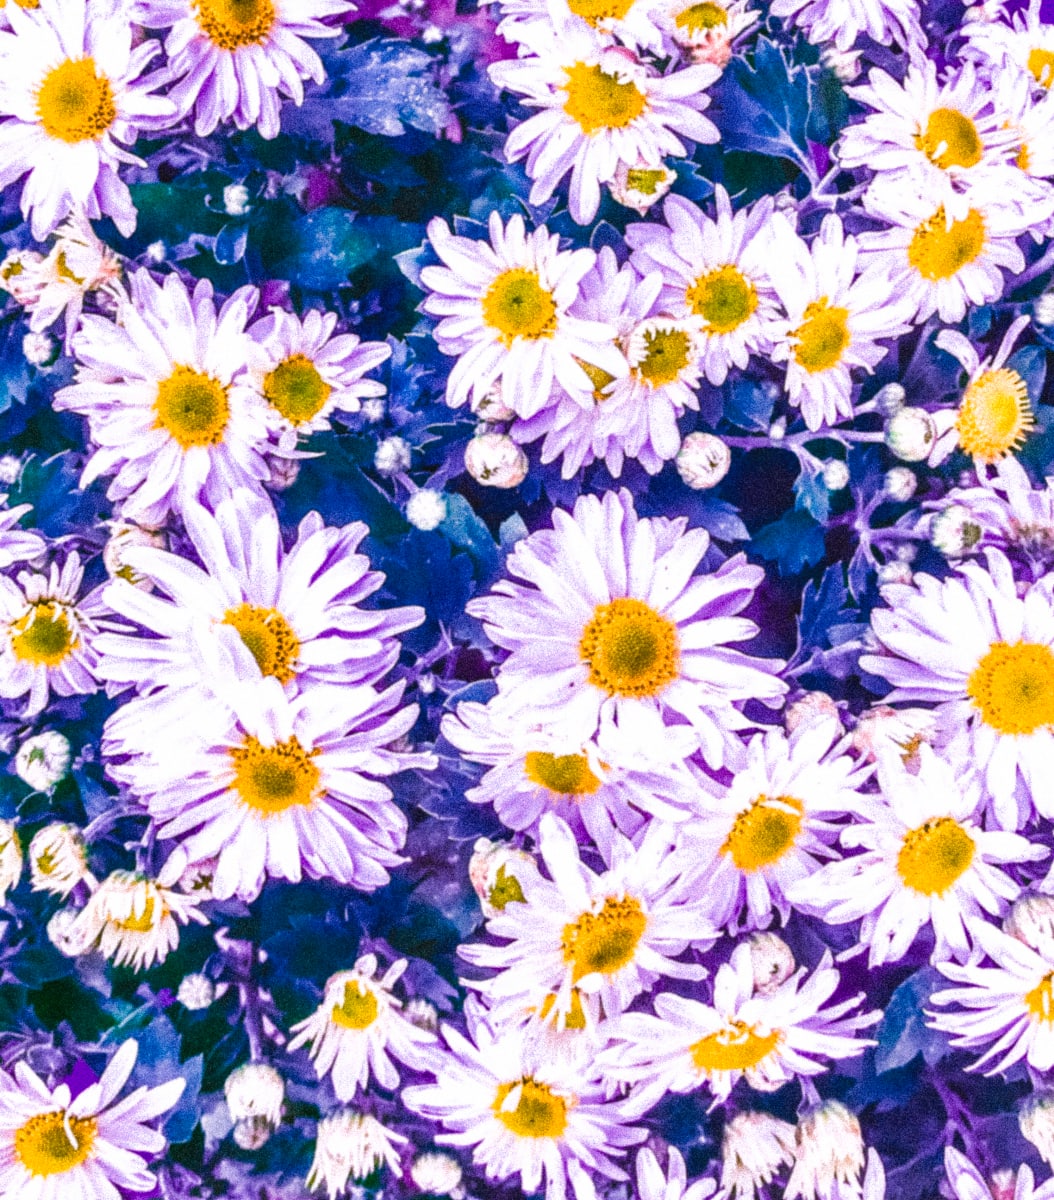 All the Pretty Daisies by Eileen Backman 